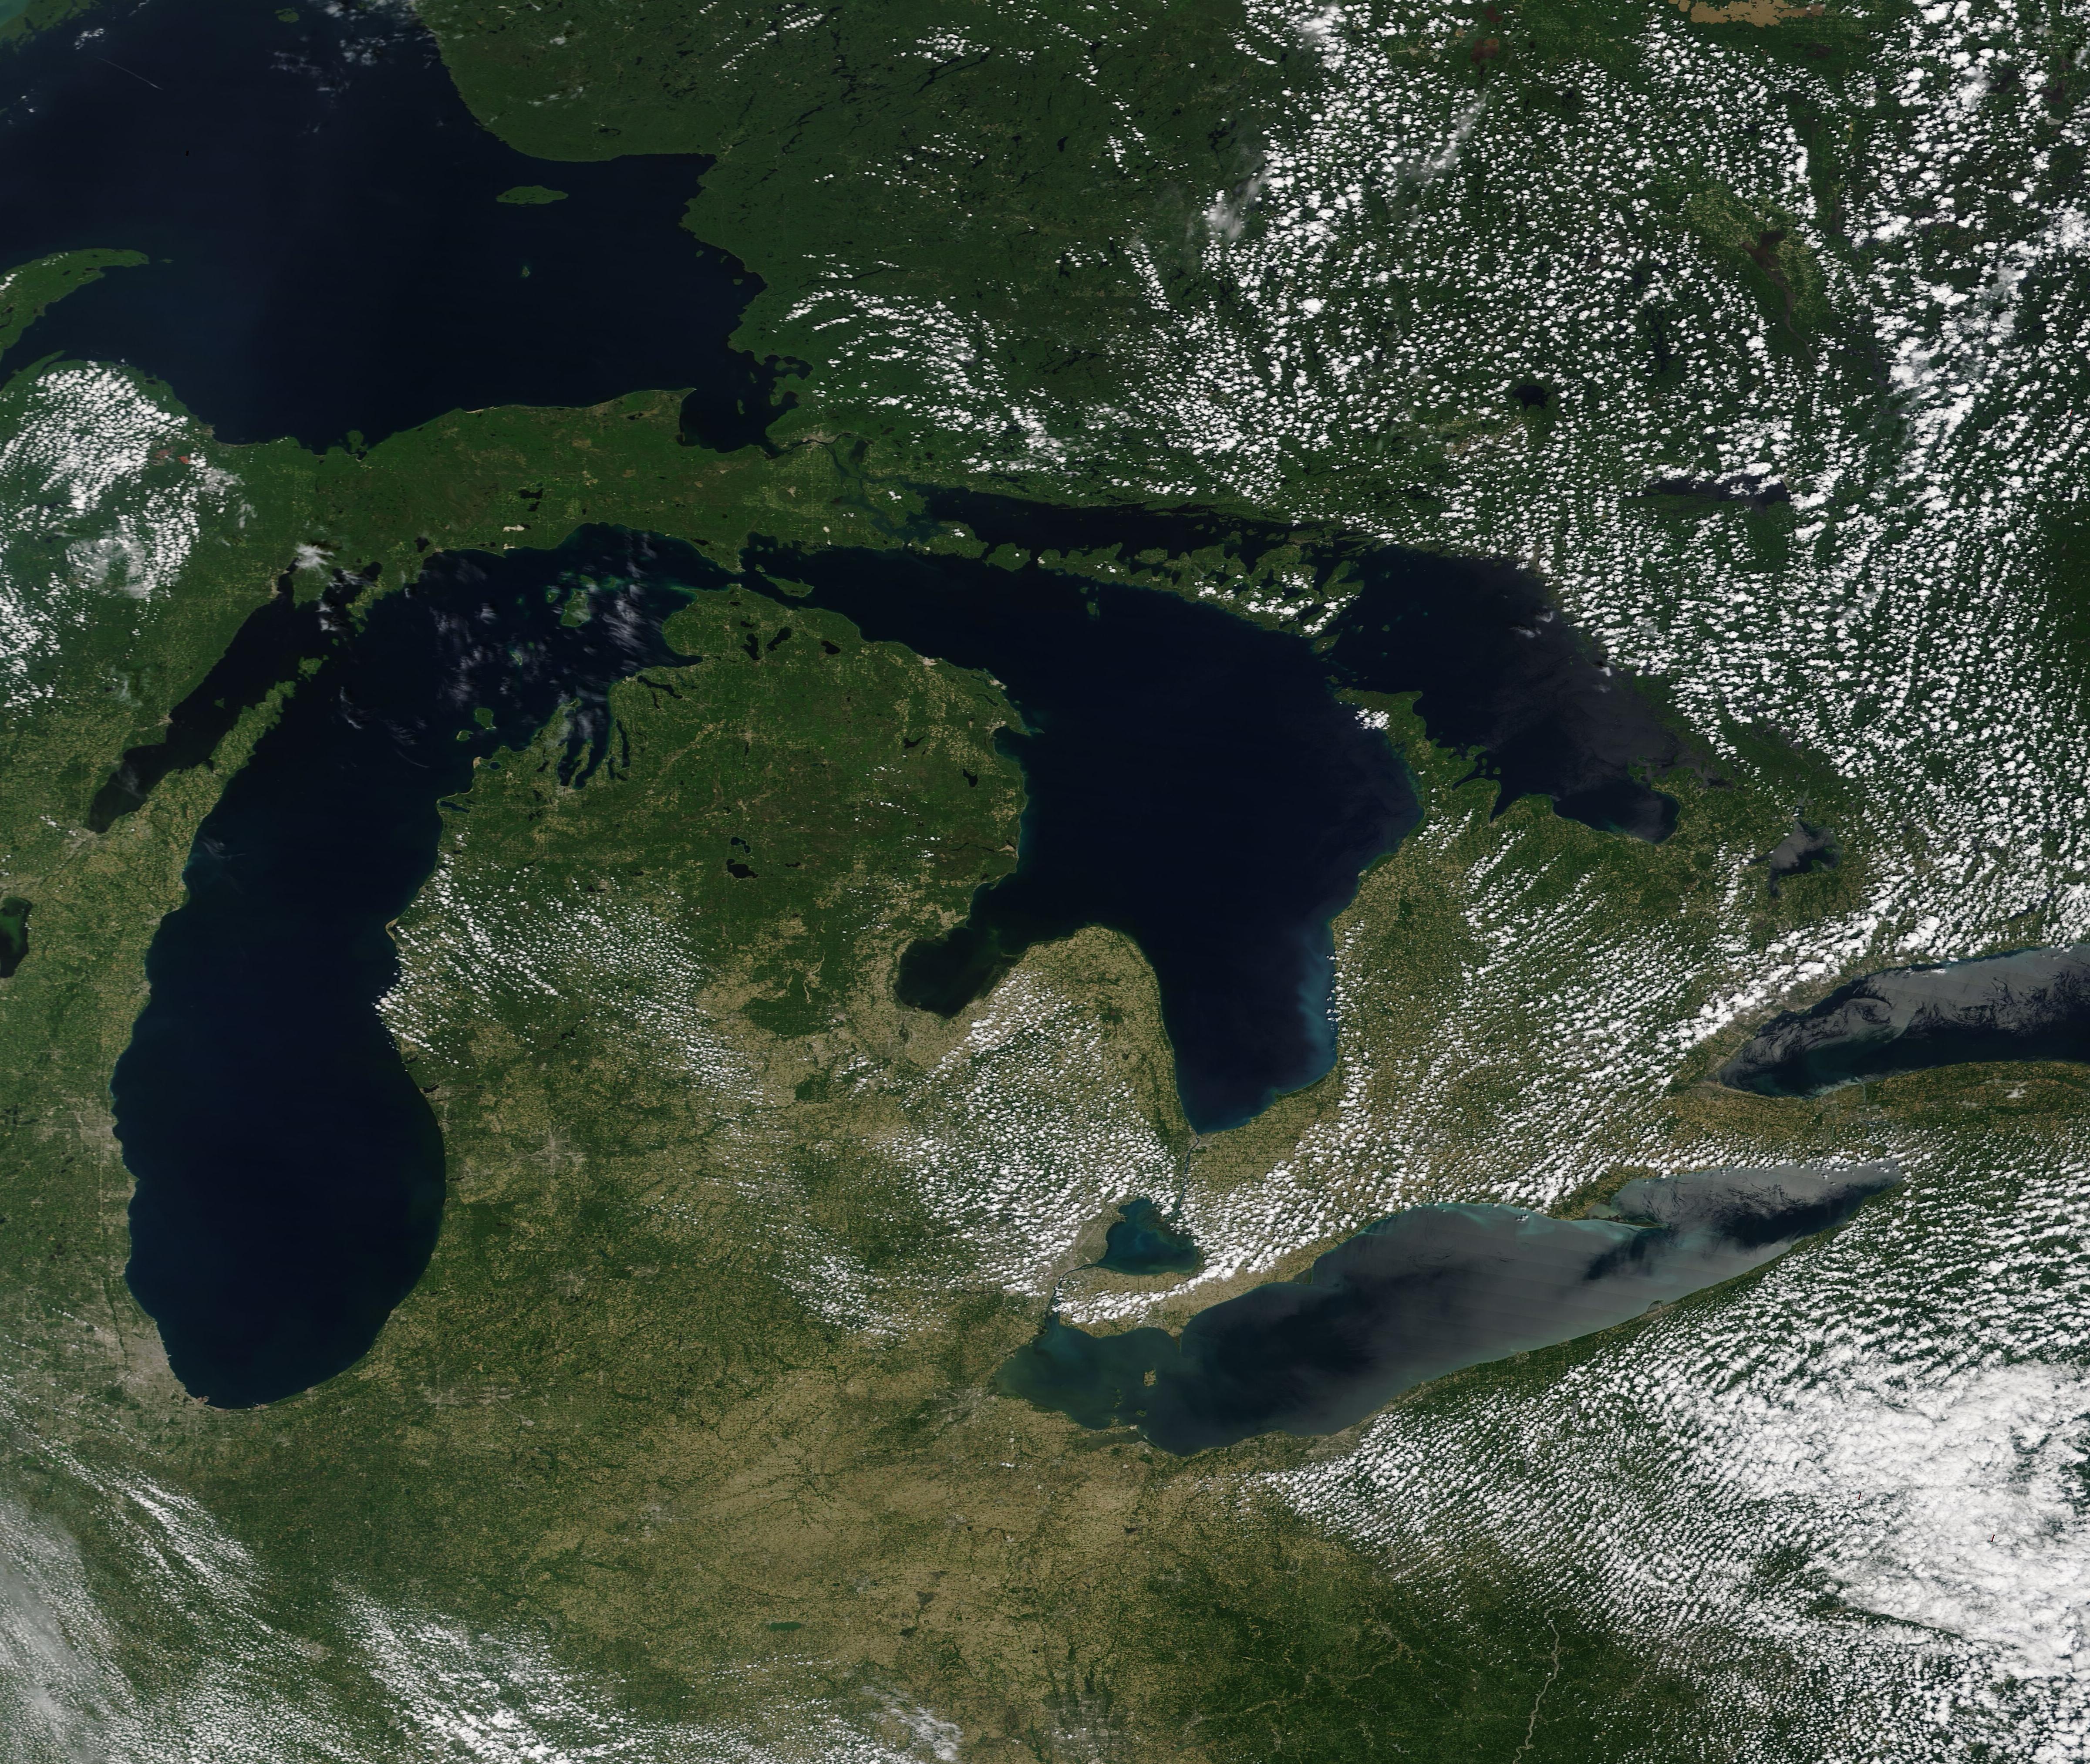 On July 1, 2020, the Moderate Resolution Imaging Spectroradiometer (MODIS) onboard NASA’s Terra satellite acquired this image of the Great Lakes. Credit: NASA/MODIS Land Rapid Response Team/NASA Goddard Space Flight Center 
